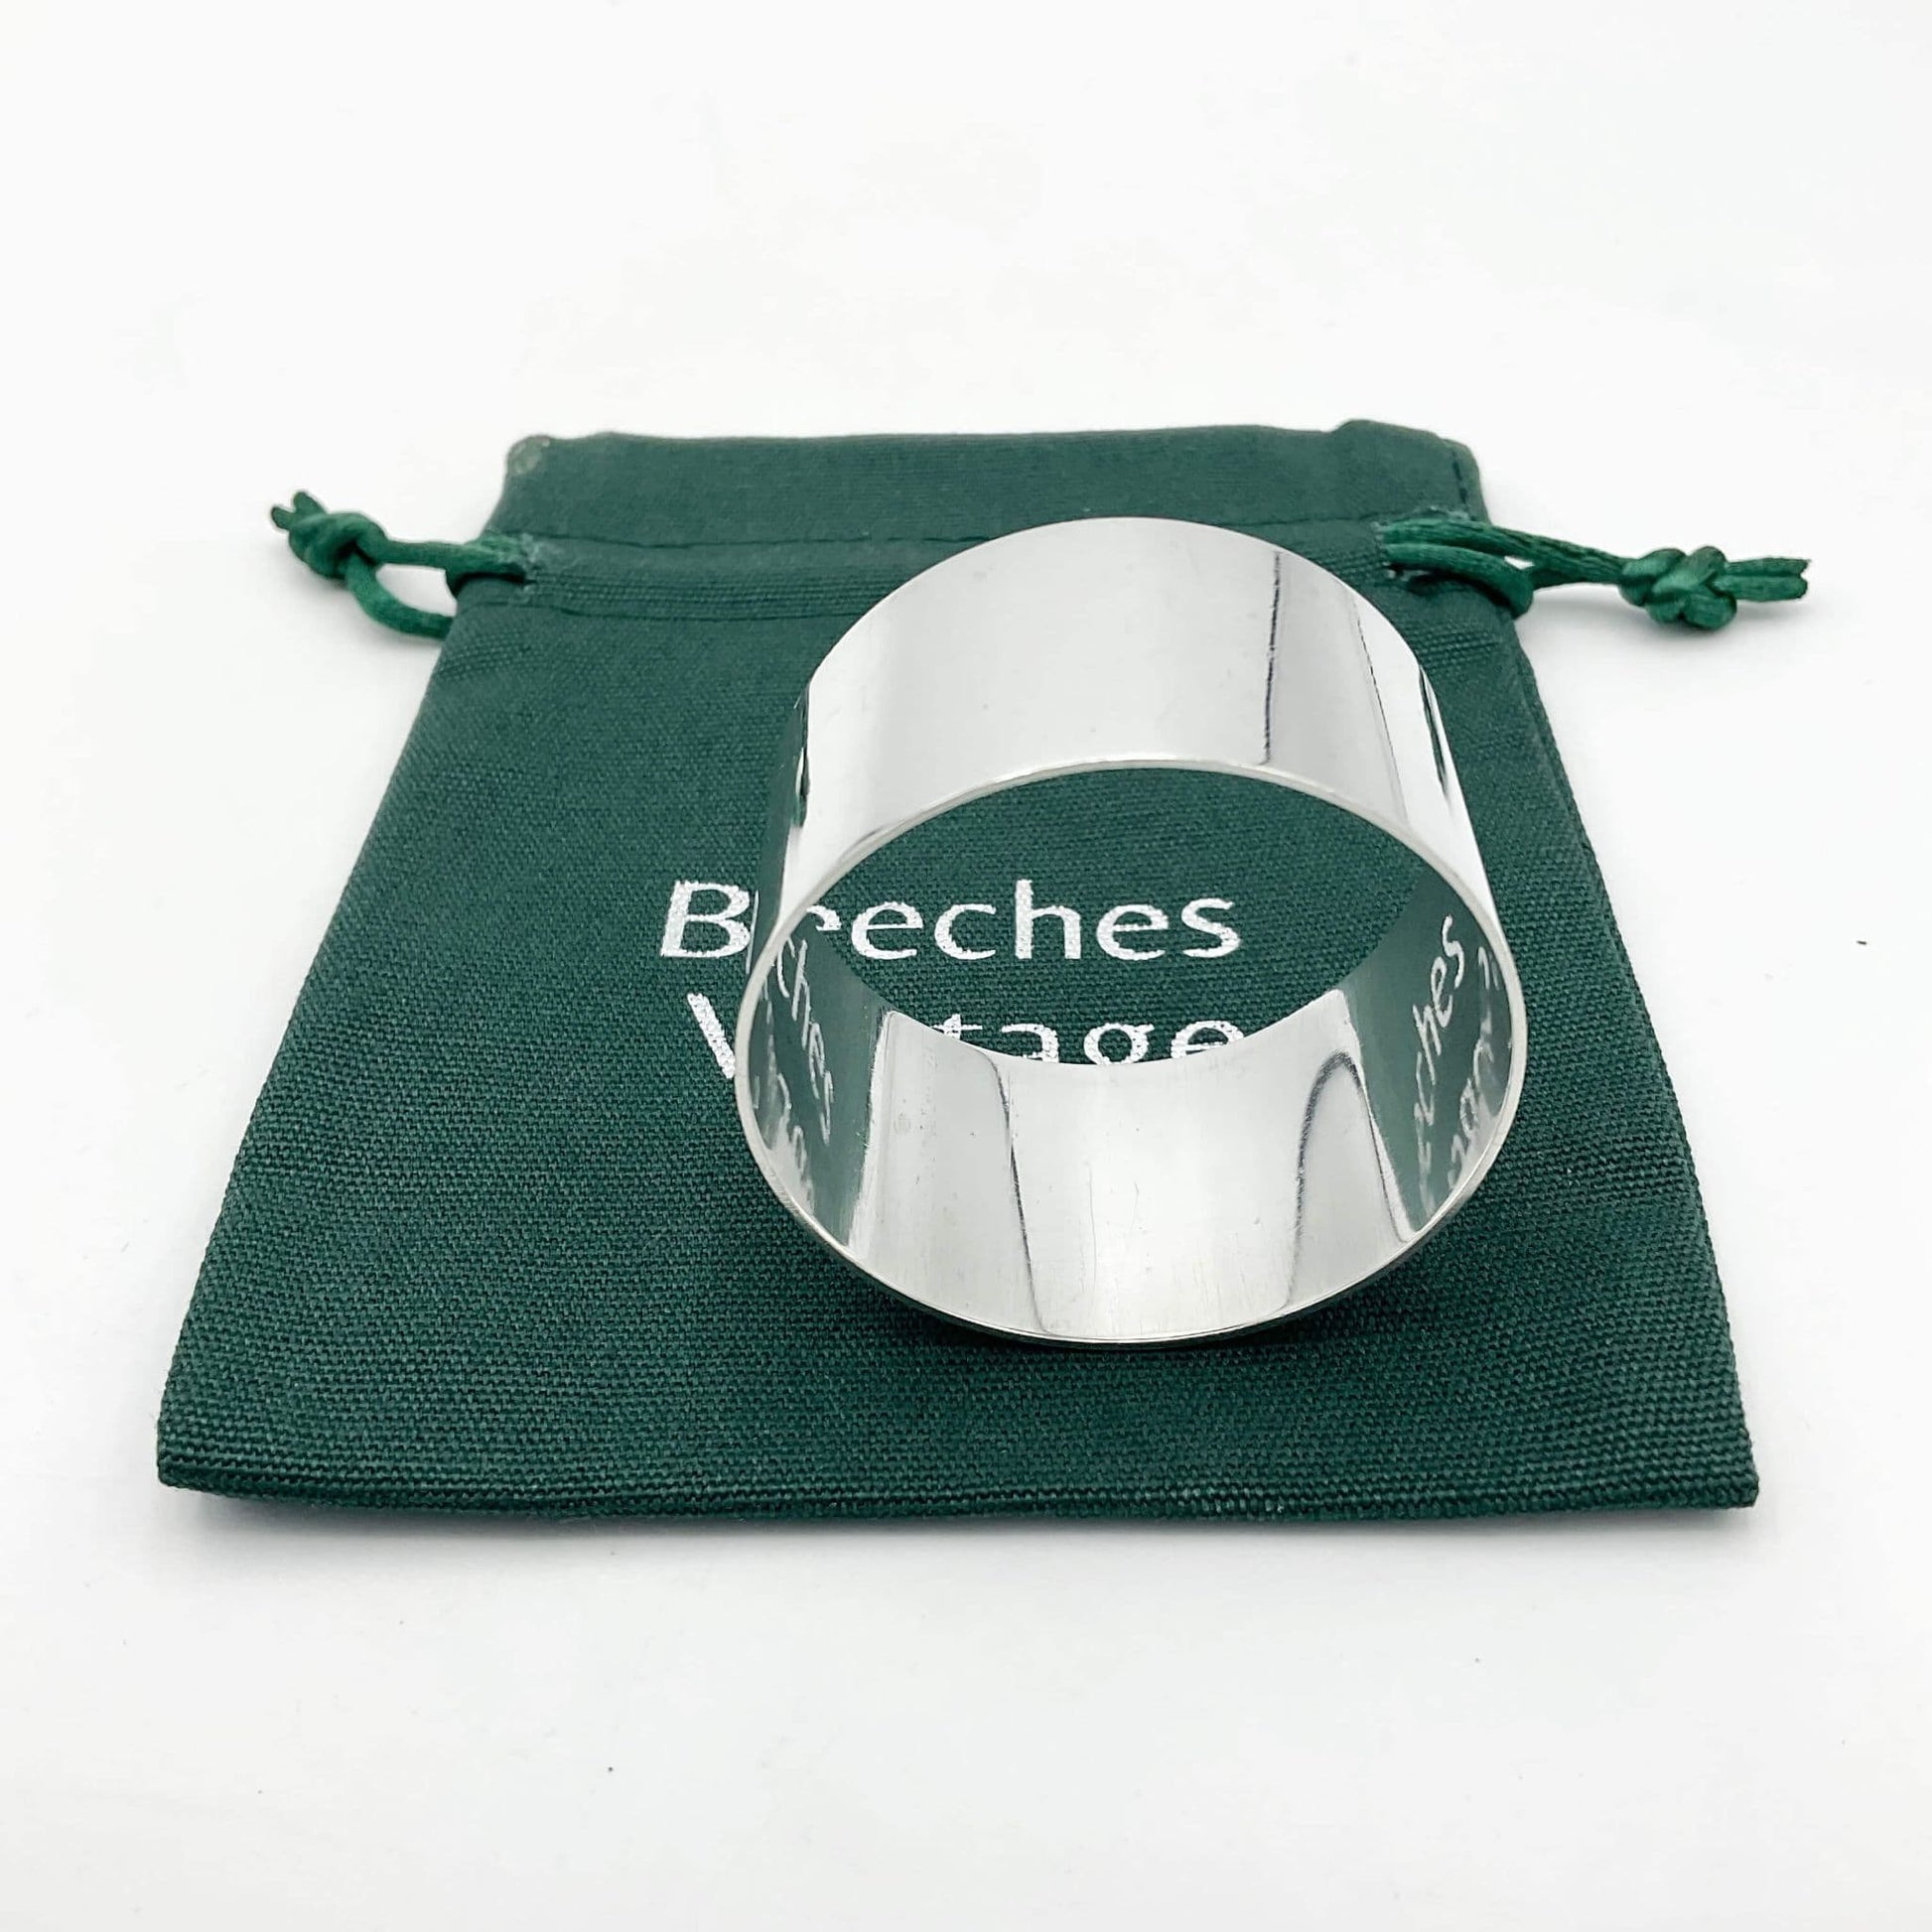 The silver napkin ring sitting on a green gift bag.